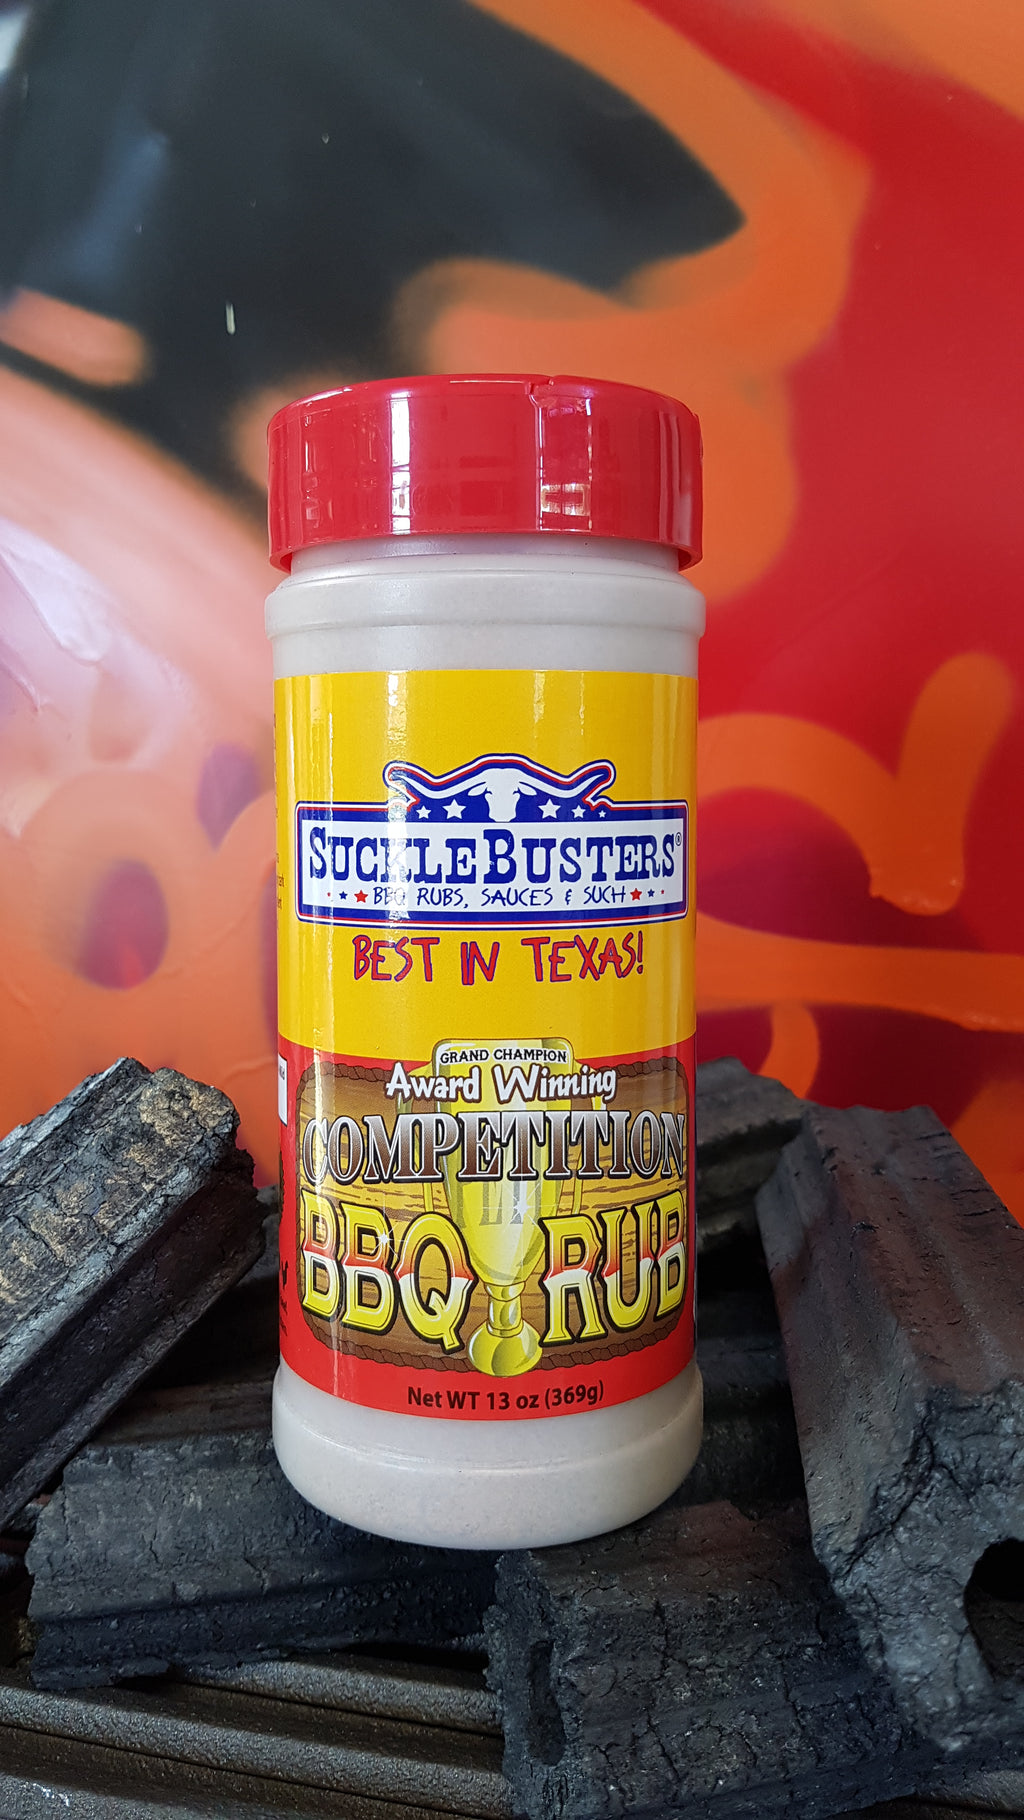 Award Winning Competition BBQ Rub 369g by Sucklebusters